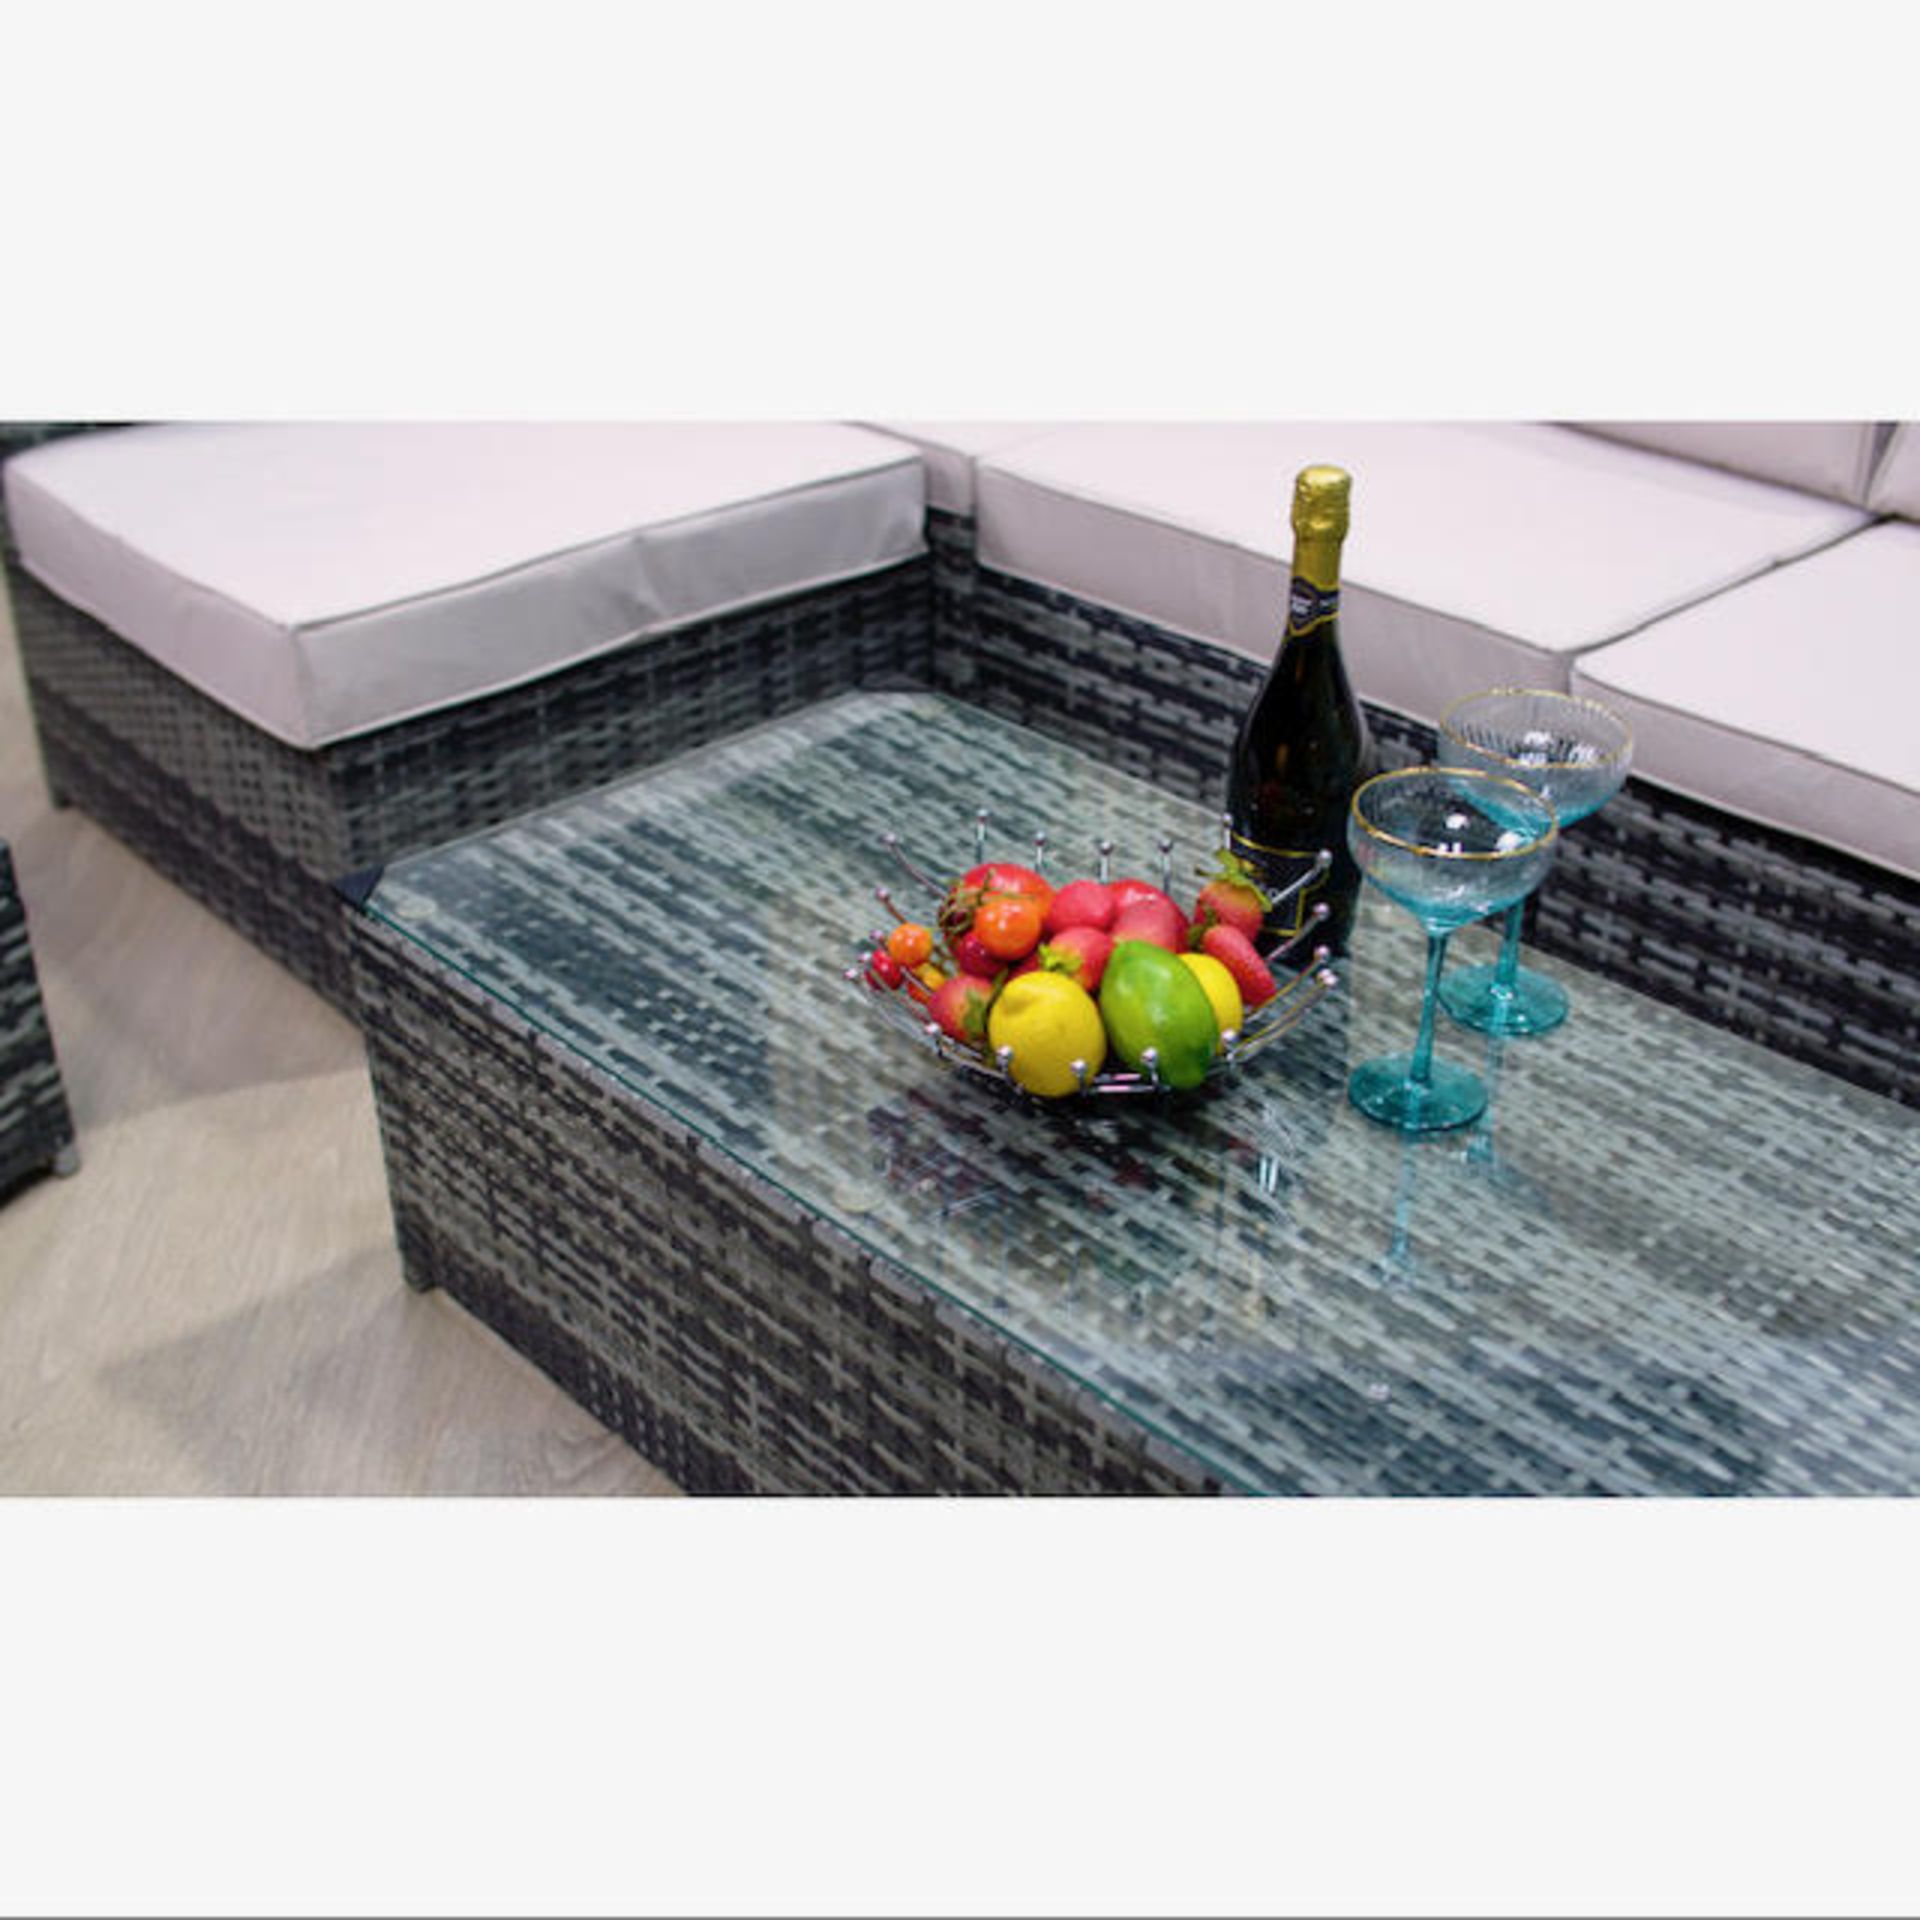 BRAND NEW LINEA 7 PIECE LUXURY RATTAN SETS RRP £1499 EACH. PERFECT FOR THOSE SUMMER NIGHTS FOR - Image 4 of 6